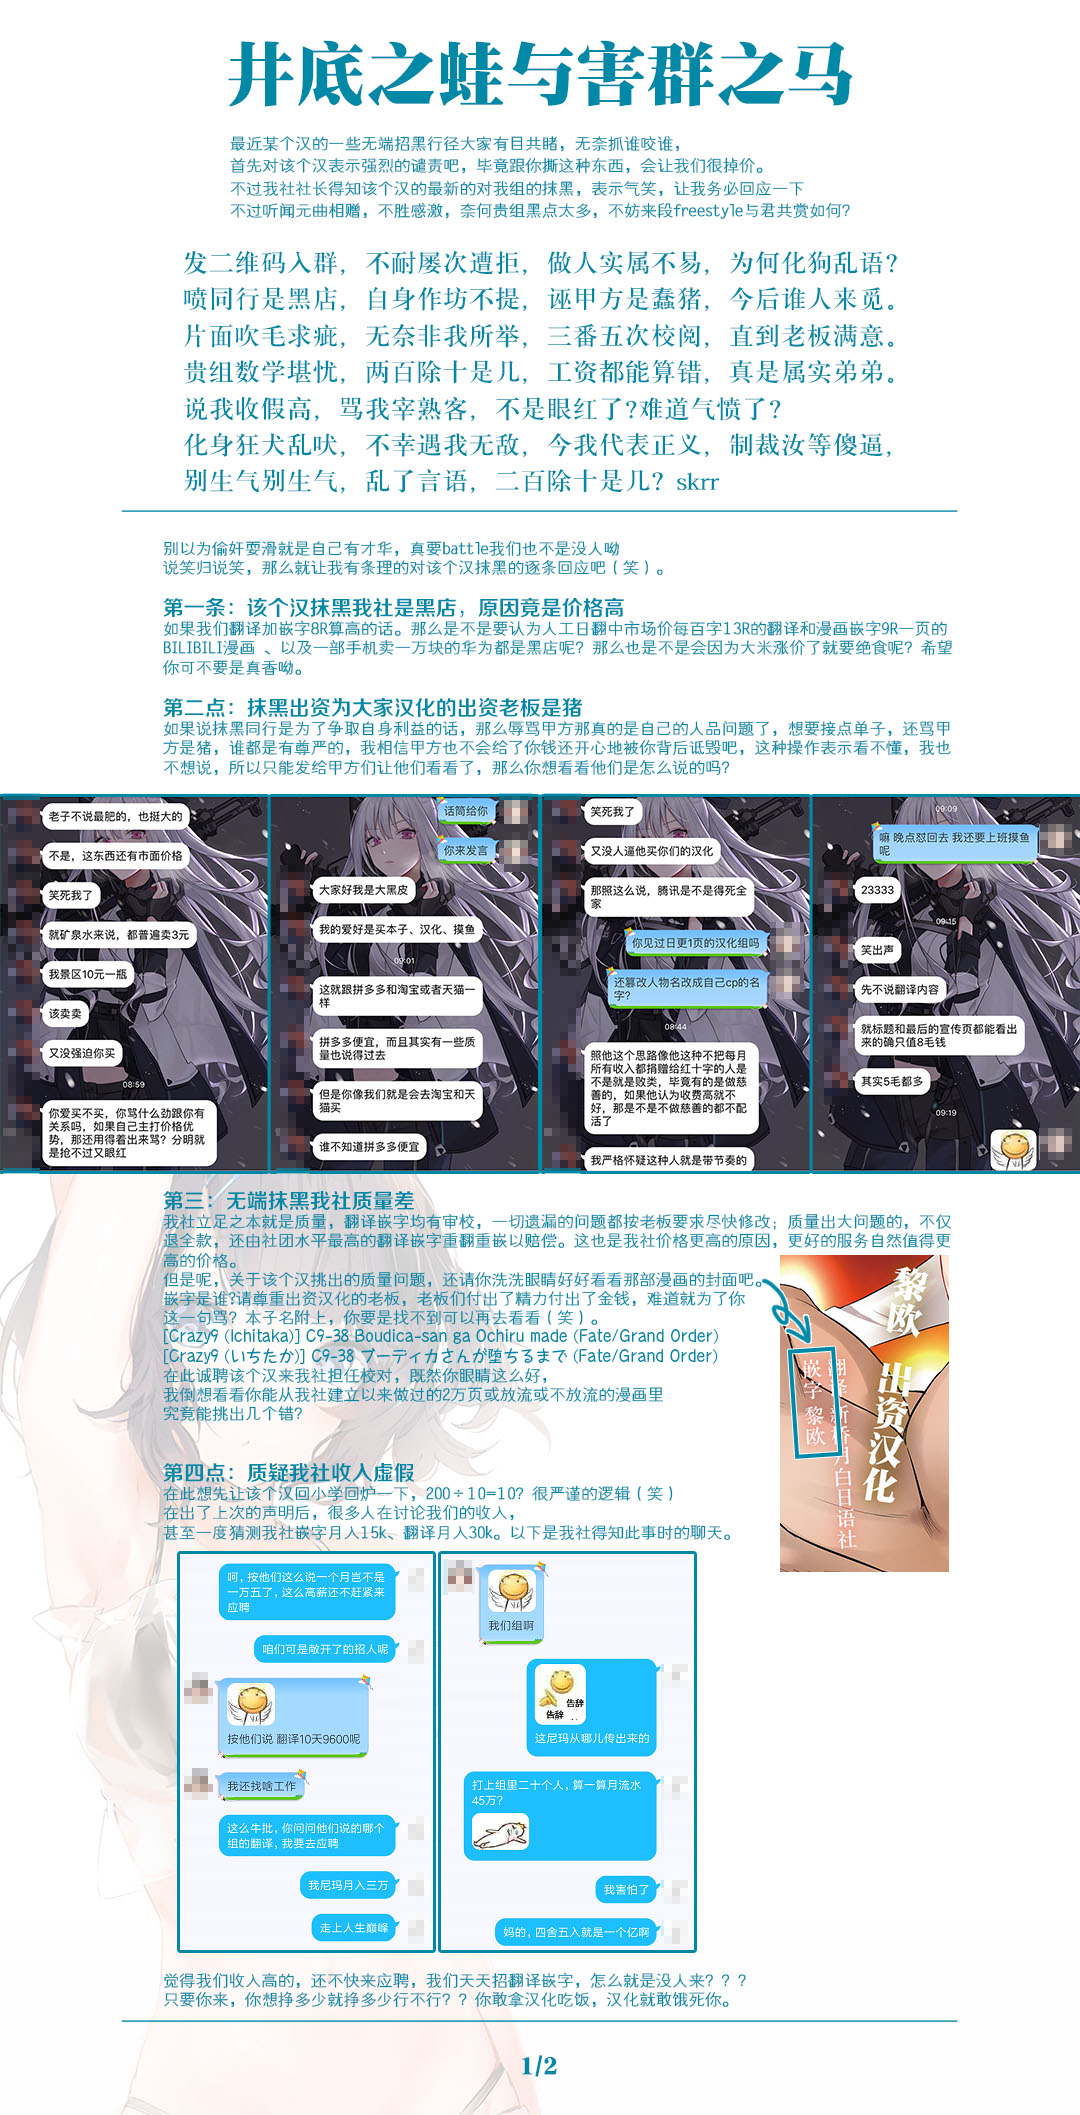 [Remora Works] LESFES CO -DELIVERIES- [Chinese] [WARREN RIANE×新桥月白日语社] page 30 full